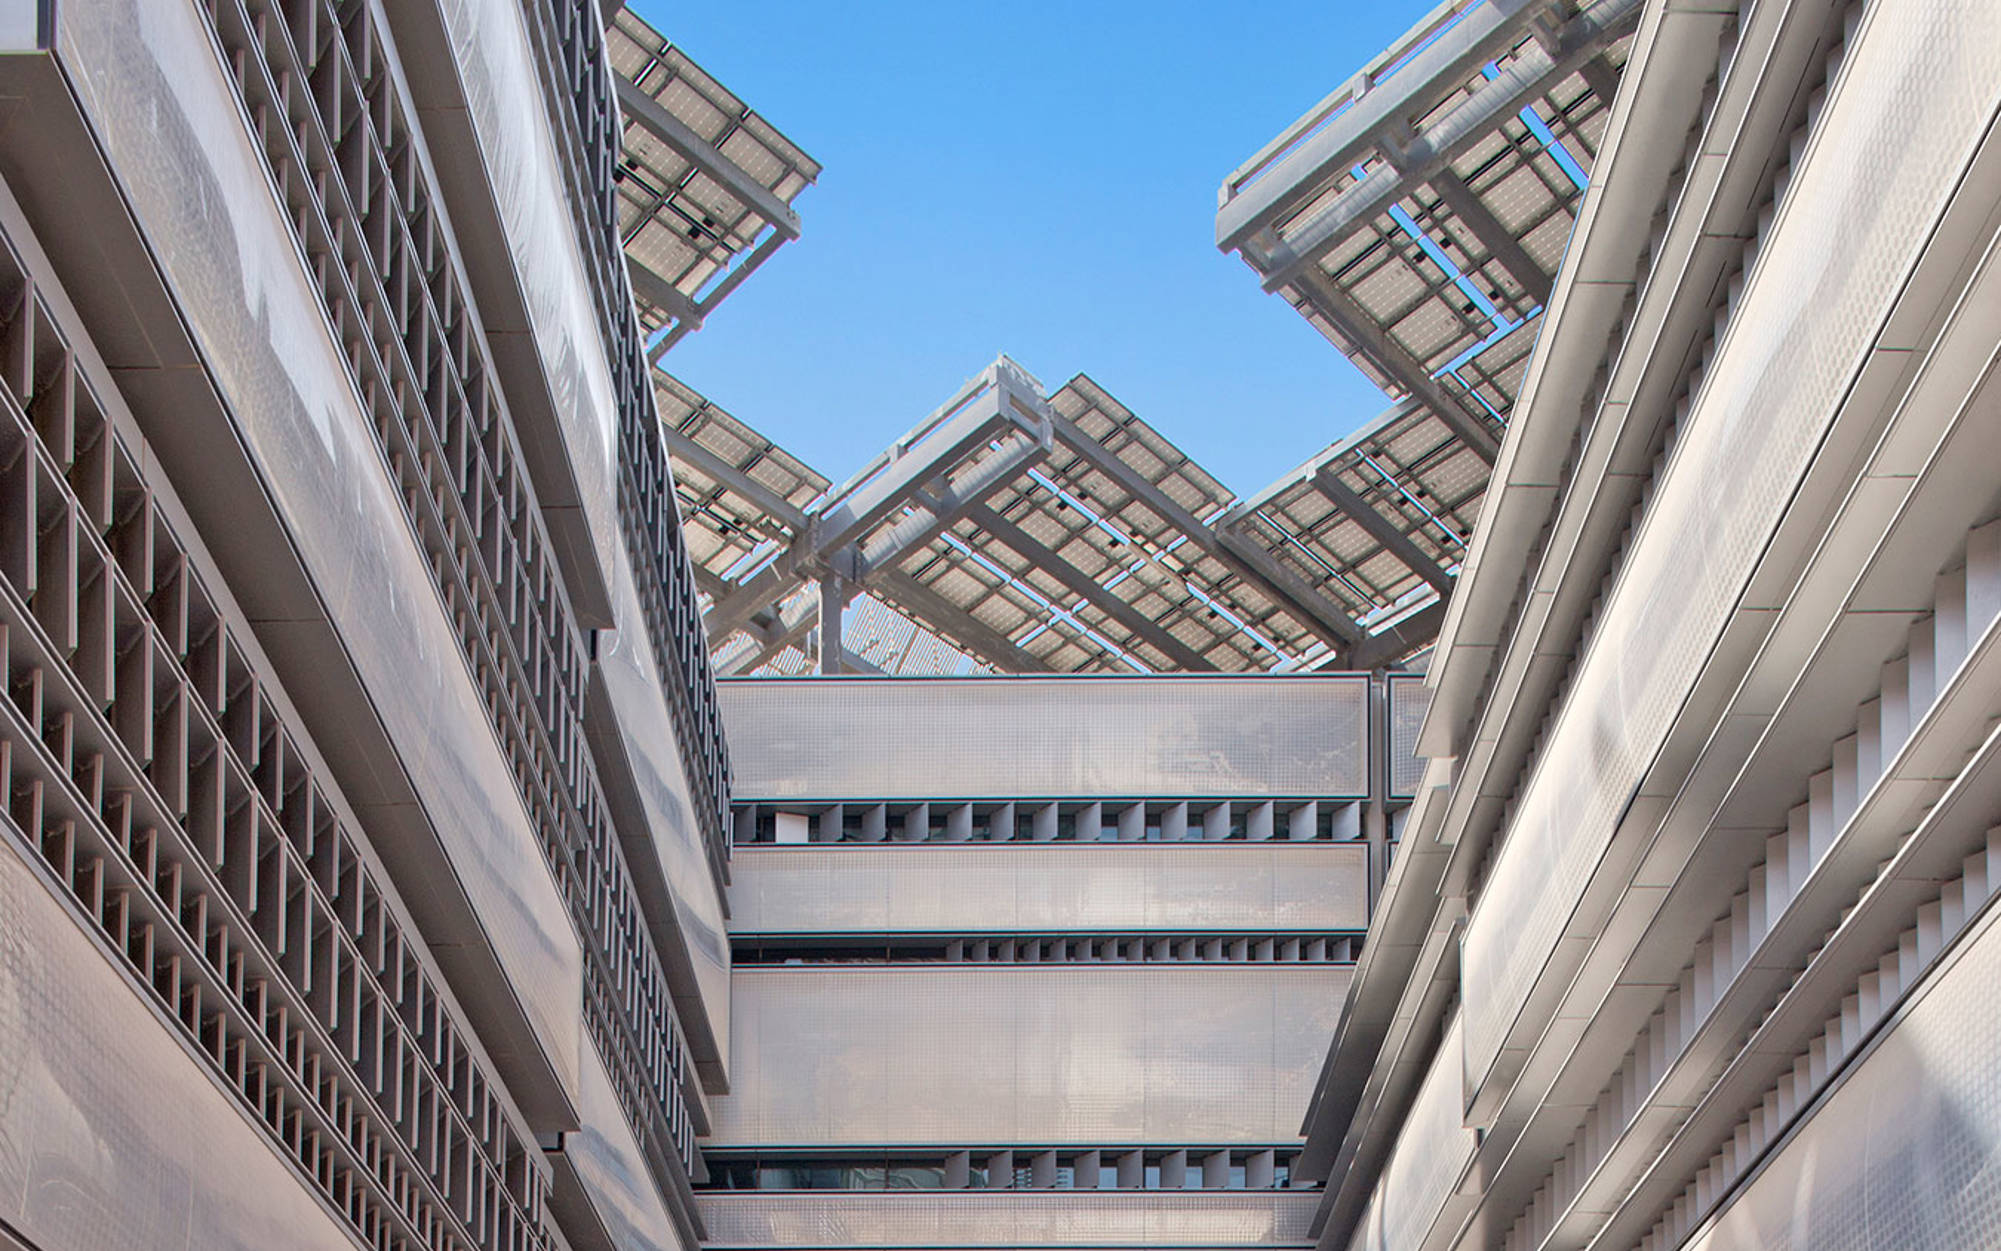 A range of Jotun products was used to protect Masdar Institute of Science & Technology